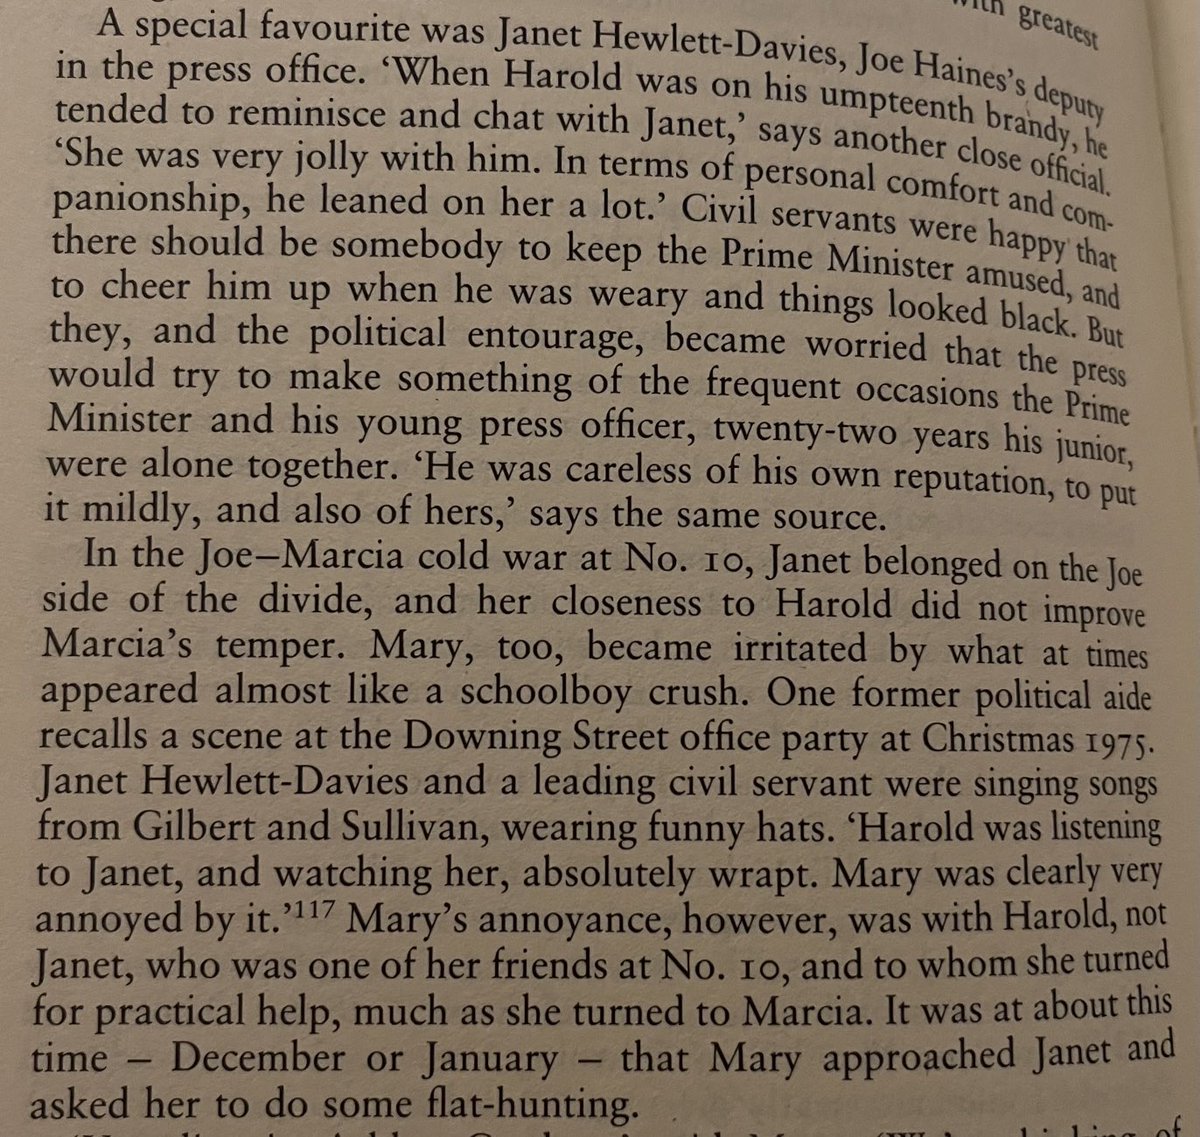 Ben Pimlott’s book #HaroldWilson says below on Janet Hewlett-Davies: “In terms of personal comfort and companionship he leaned on her a lot”. It goes on to say Wilson’s wife Mary “became irritated by what at times appeared almost like a schoolboy crush”. @patrickkmaguire⁩